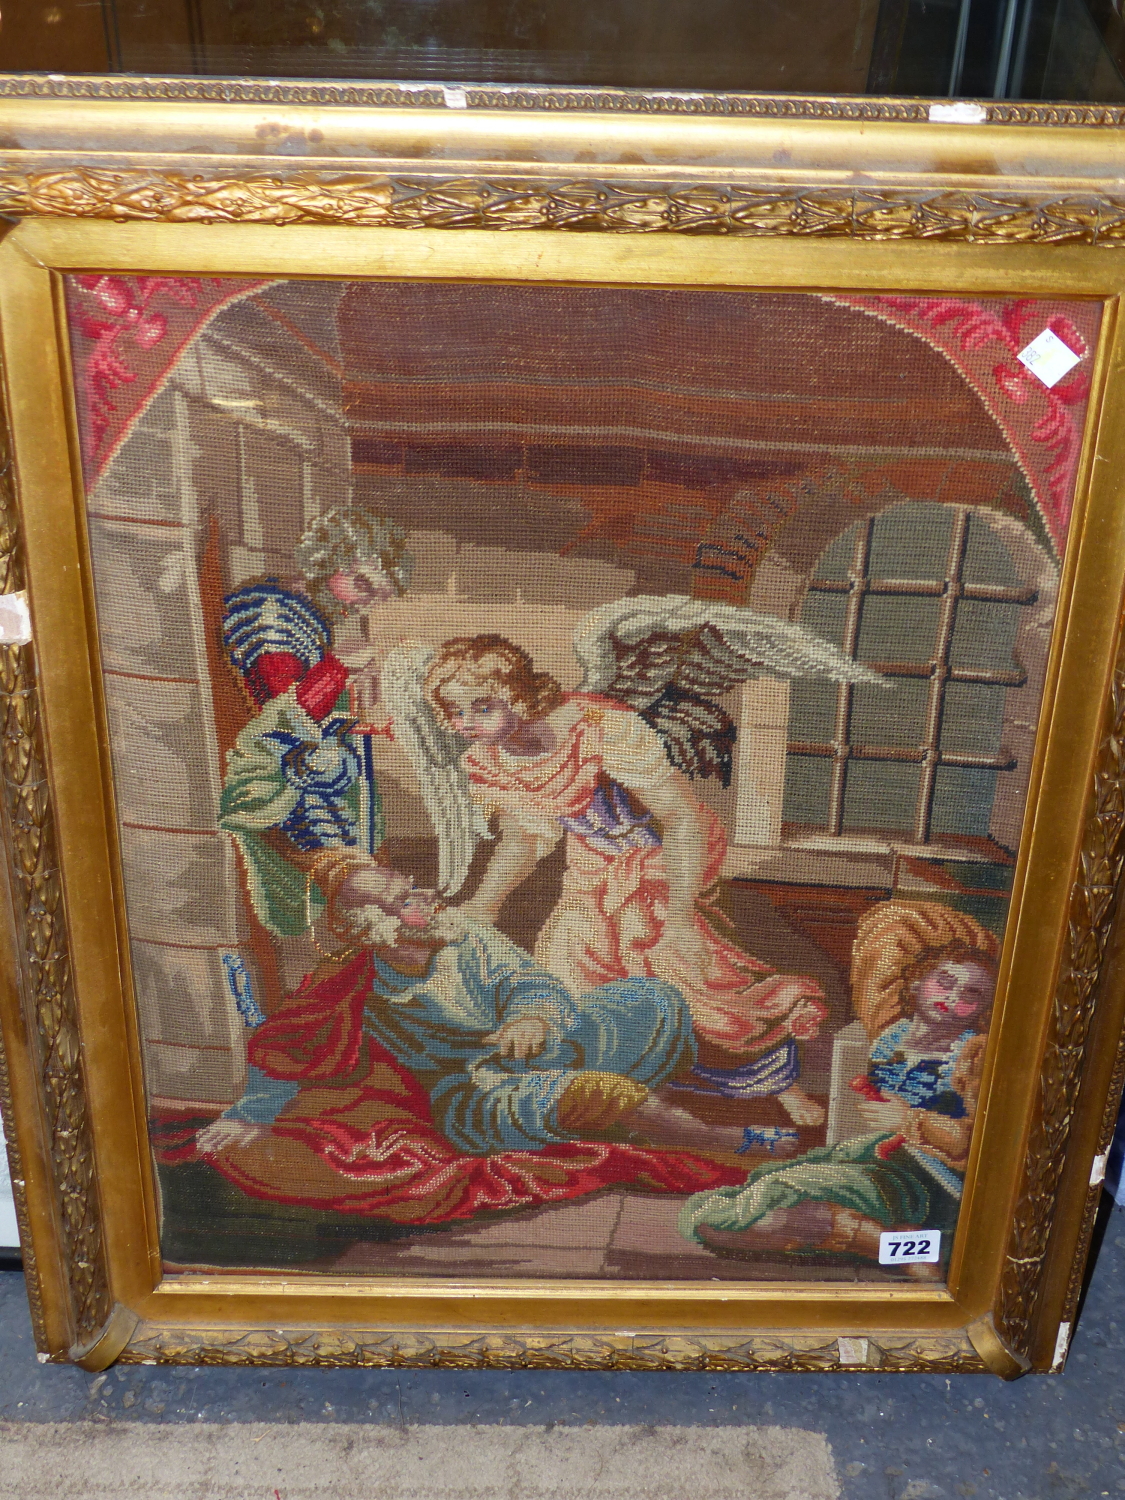 A VICTORIAN NEEDLEPOINT PANEL OF AN ANGEL AND OTHER FIGURES WITHIN AN ARCHITECTURAL SETTING. 54 x - Image 2 of 6